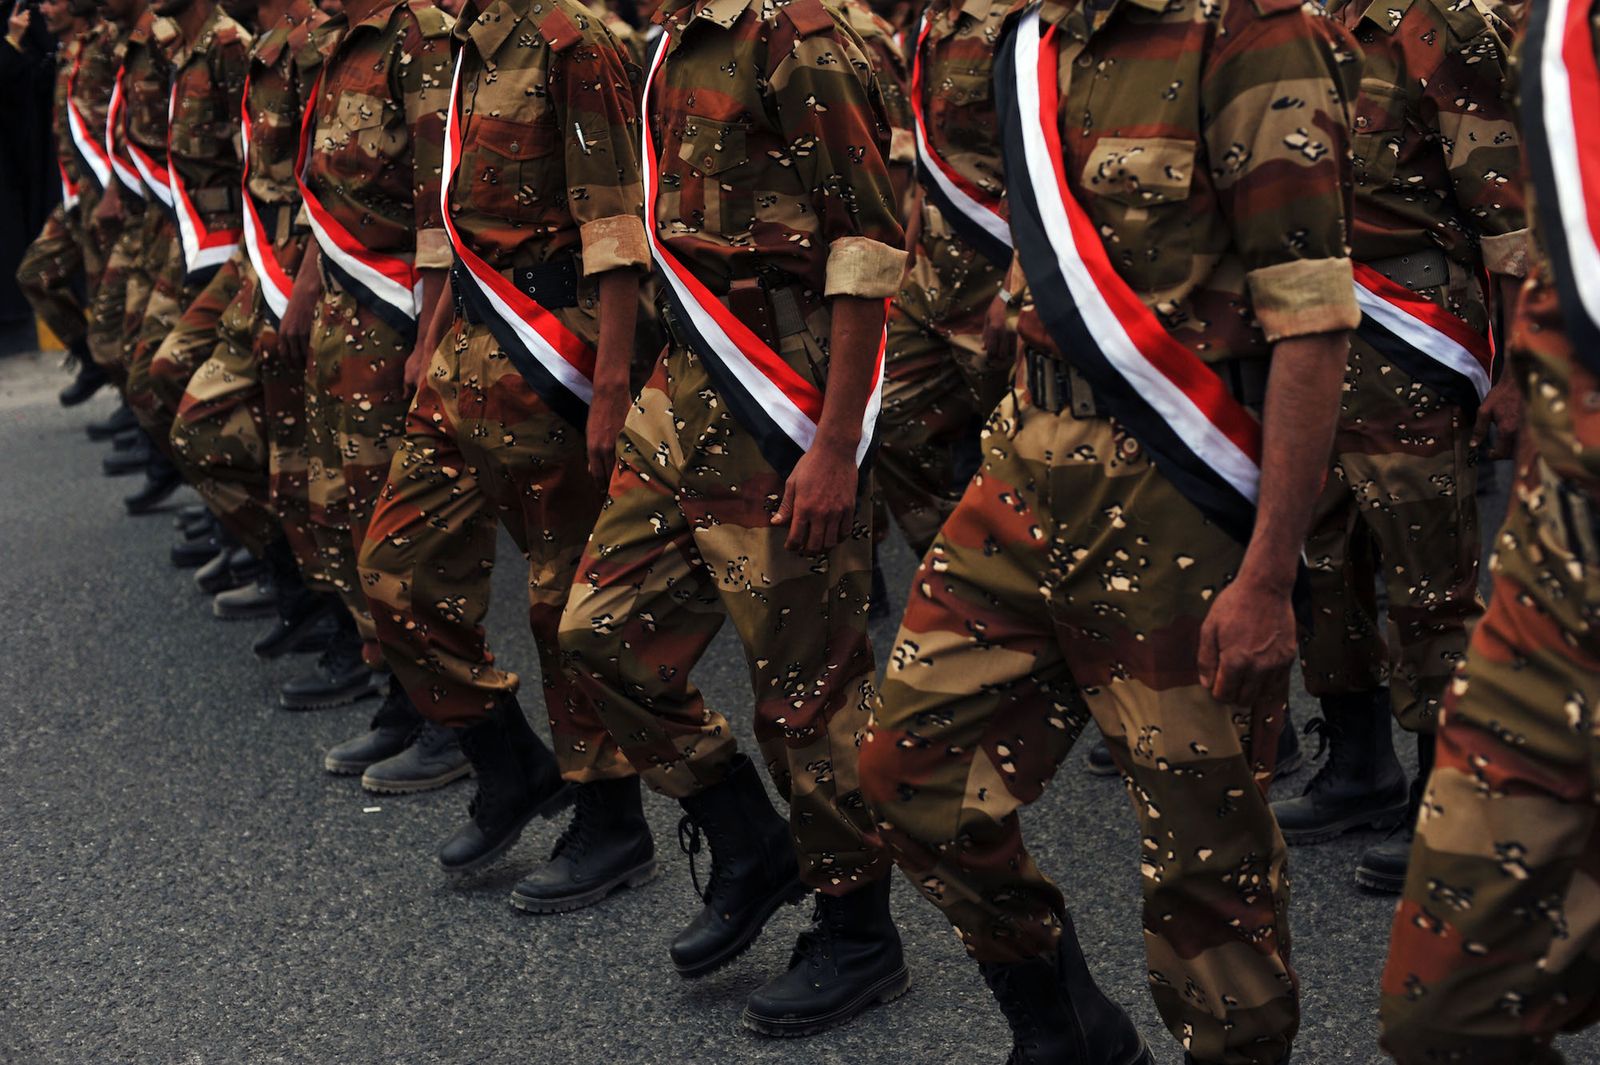 © Alex Potter - Members of the Yemeni military march in a parade to commemorate the end of the revolution.